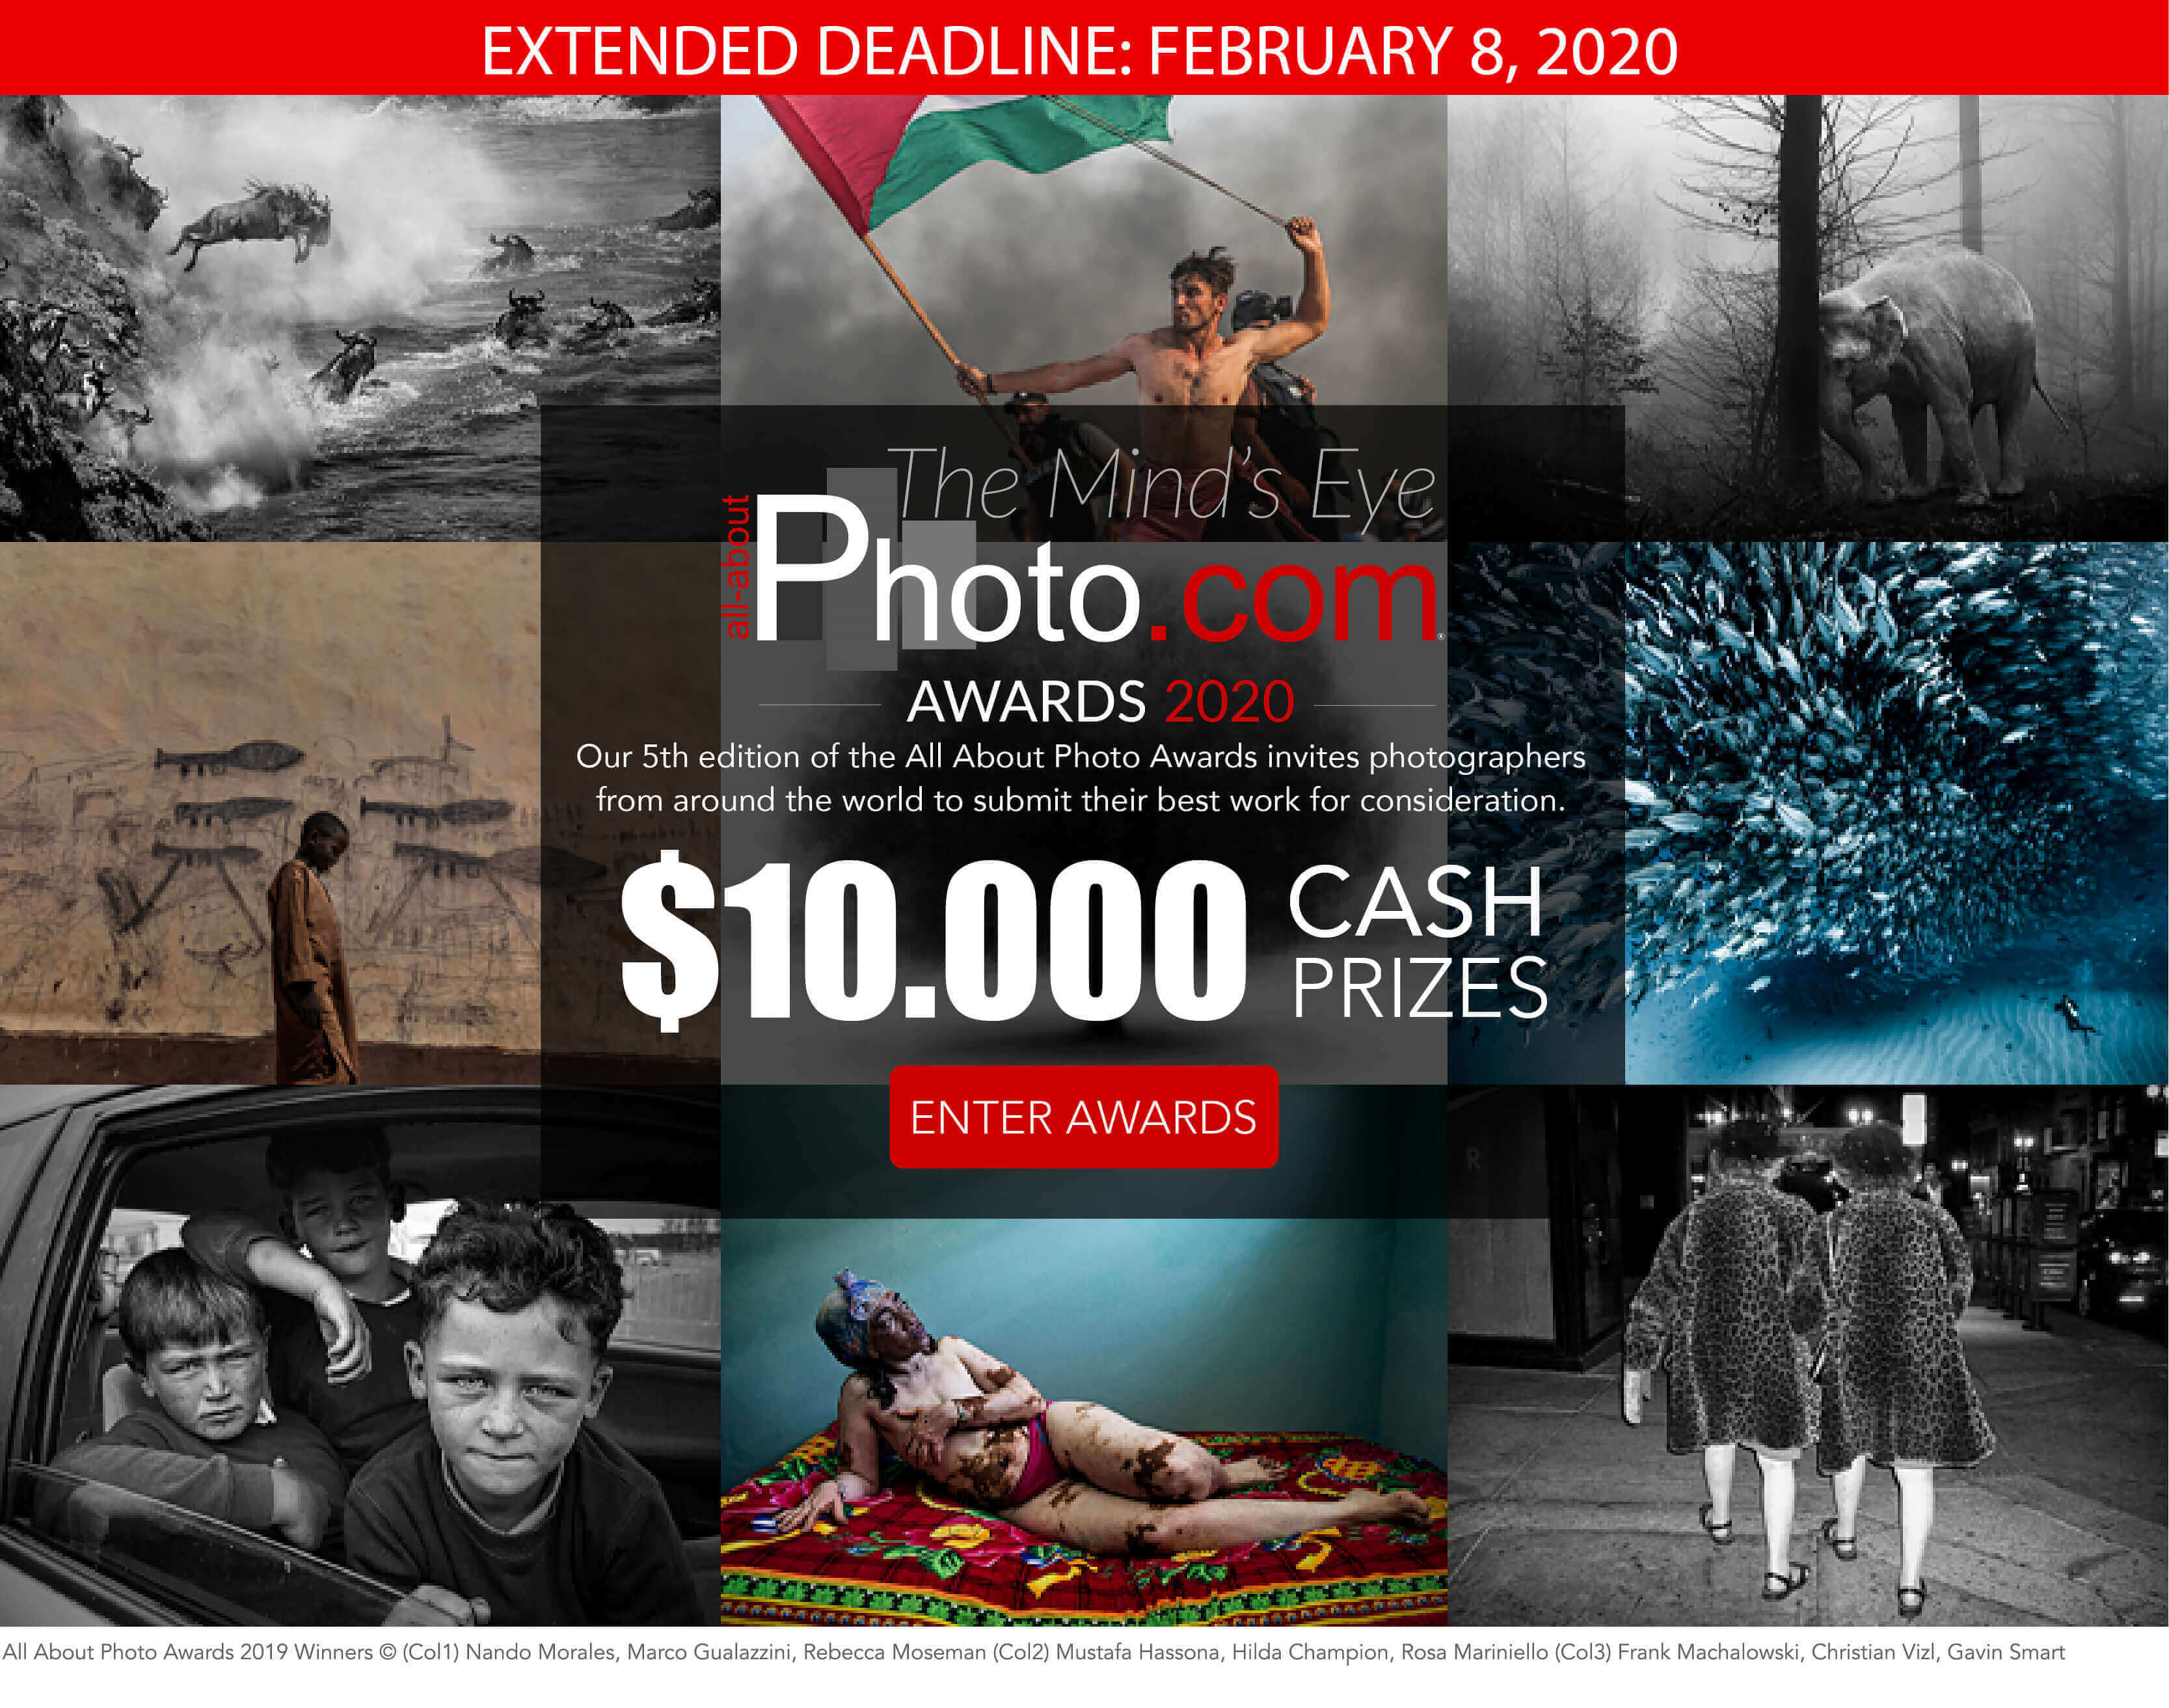 All About Photo Awards 2020